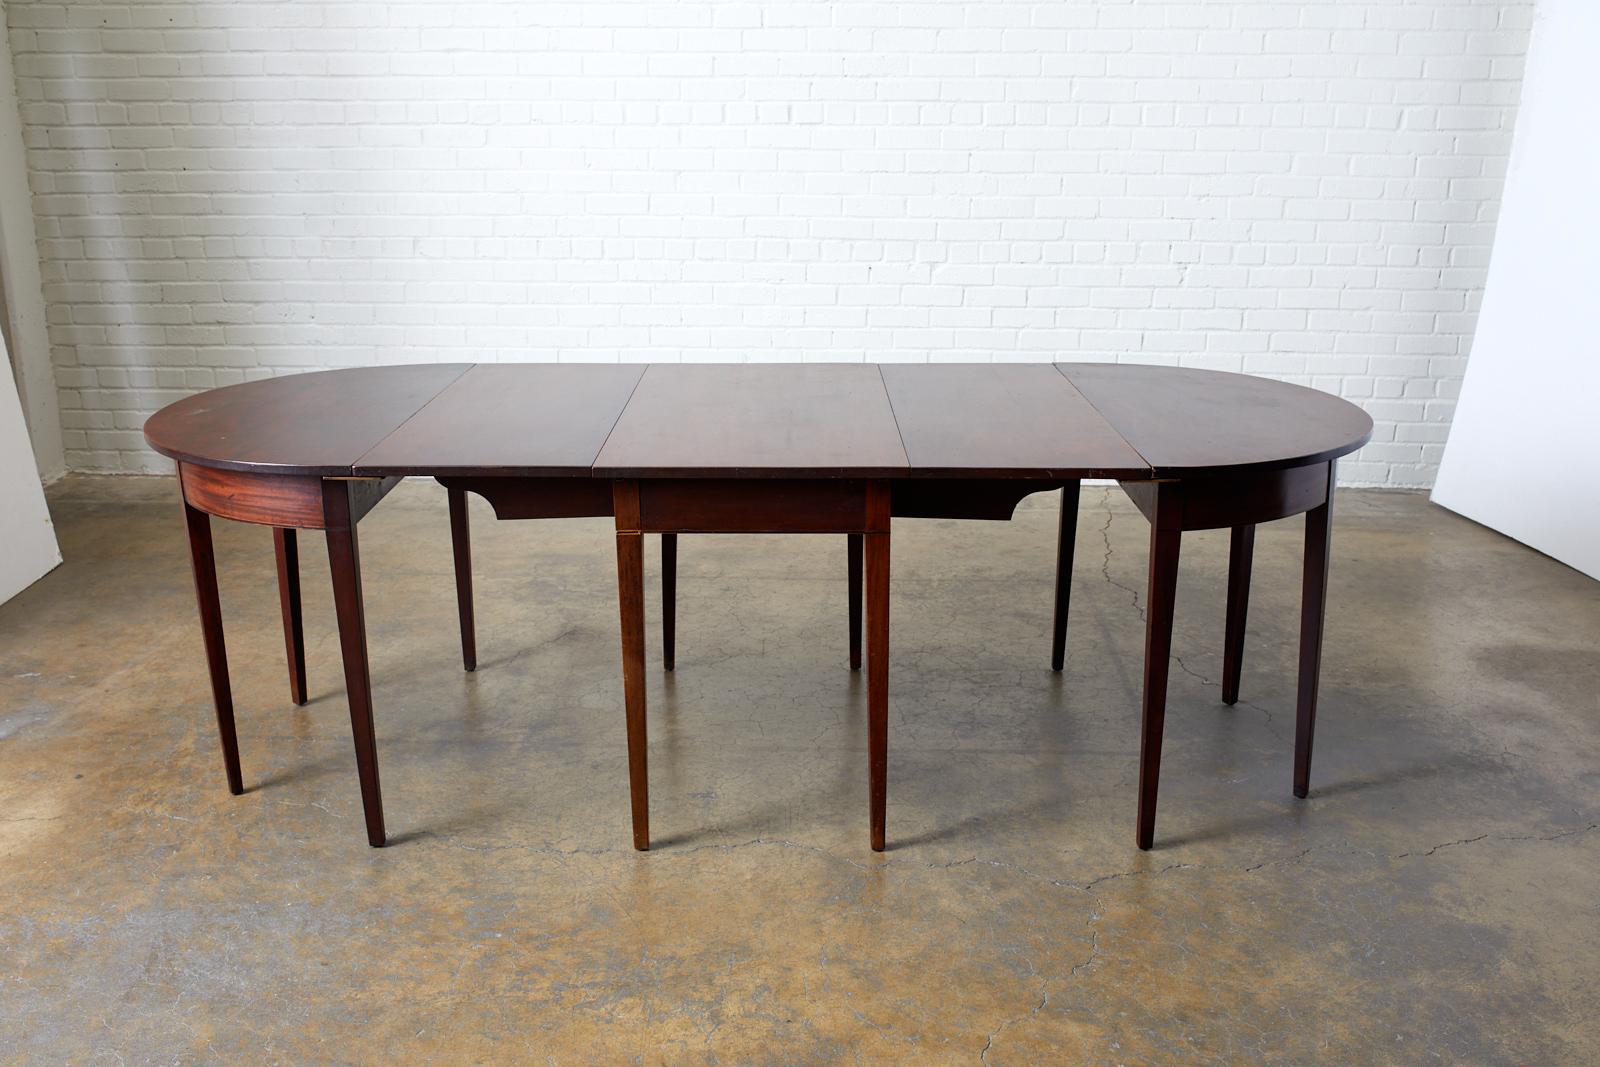 19th century English Hepplewhite style mahogany three part banquet or dining table. Set consists of one drop leaf table measuring 21 inches wide folded, and two demilunes. The table measures 52.5 inches with the leaves up and 93.5 inches wide with